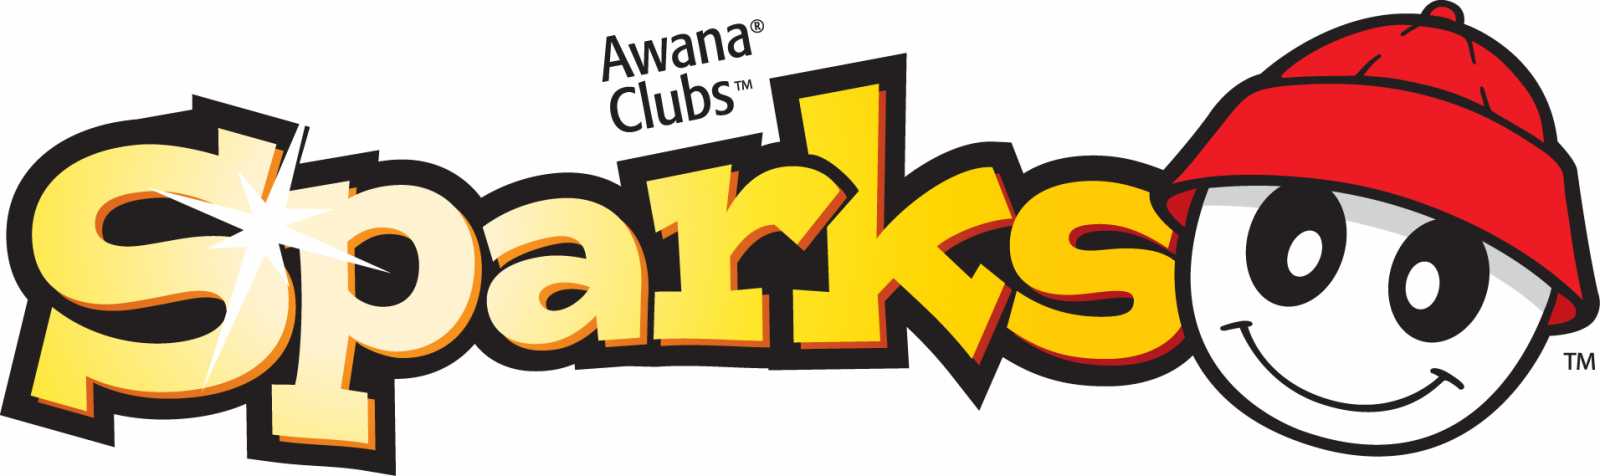 Free Sparks Awana Cliparts, Download Free Clip Art, Free